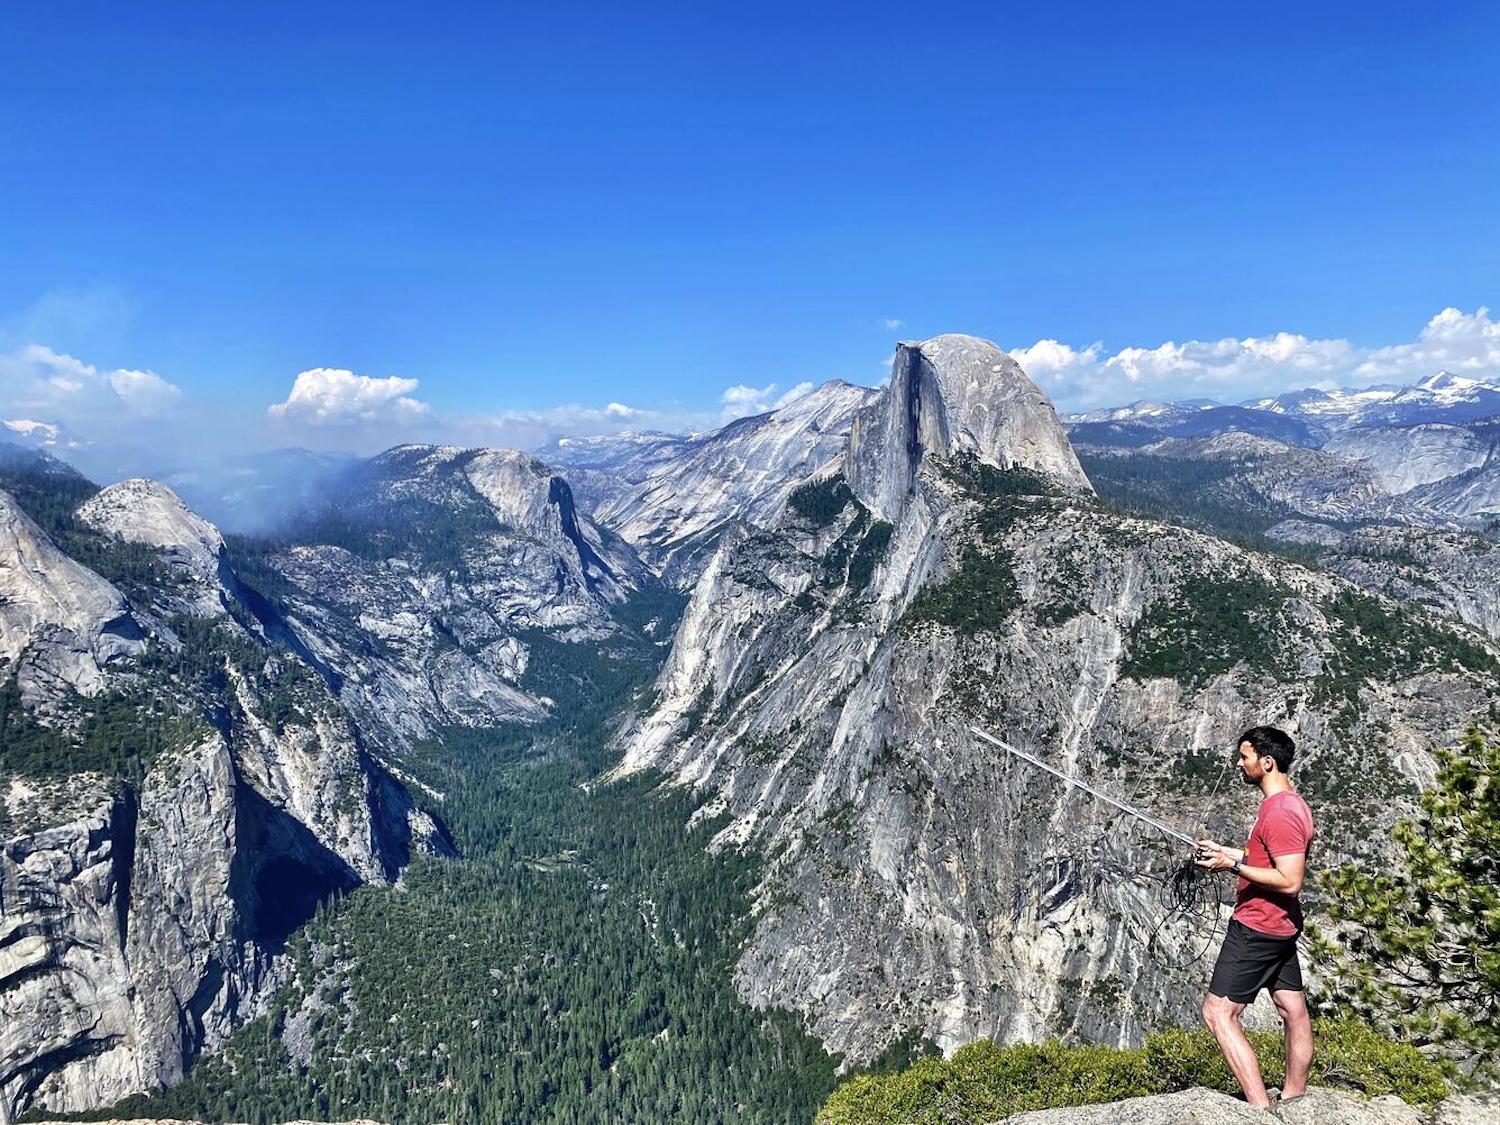 Austin Waag performing radio-telemetry at Glacier Point with Half Dome in the background, as part of a project tracking bats in Yosemite National Park.